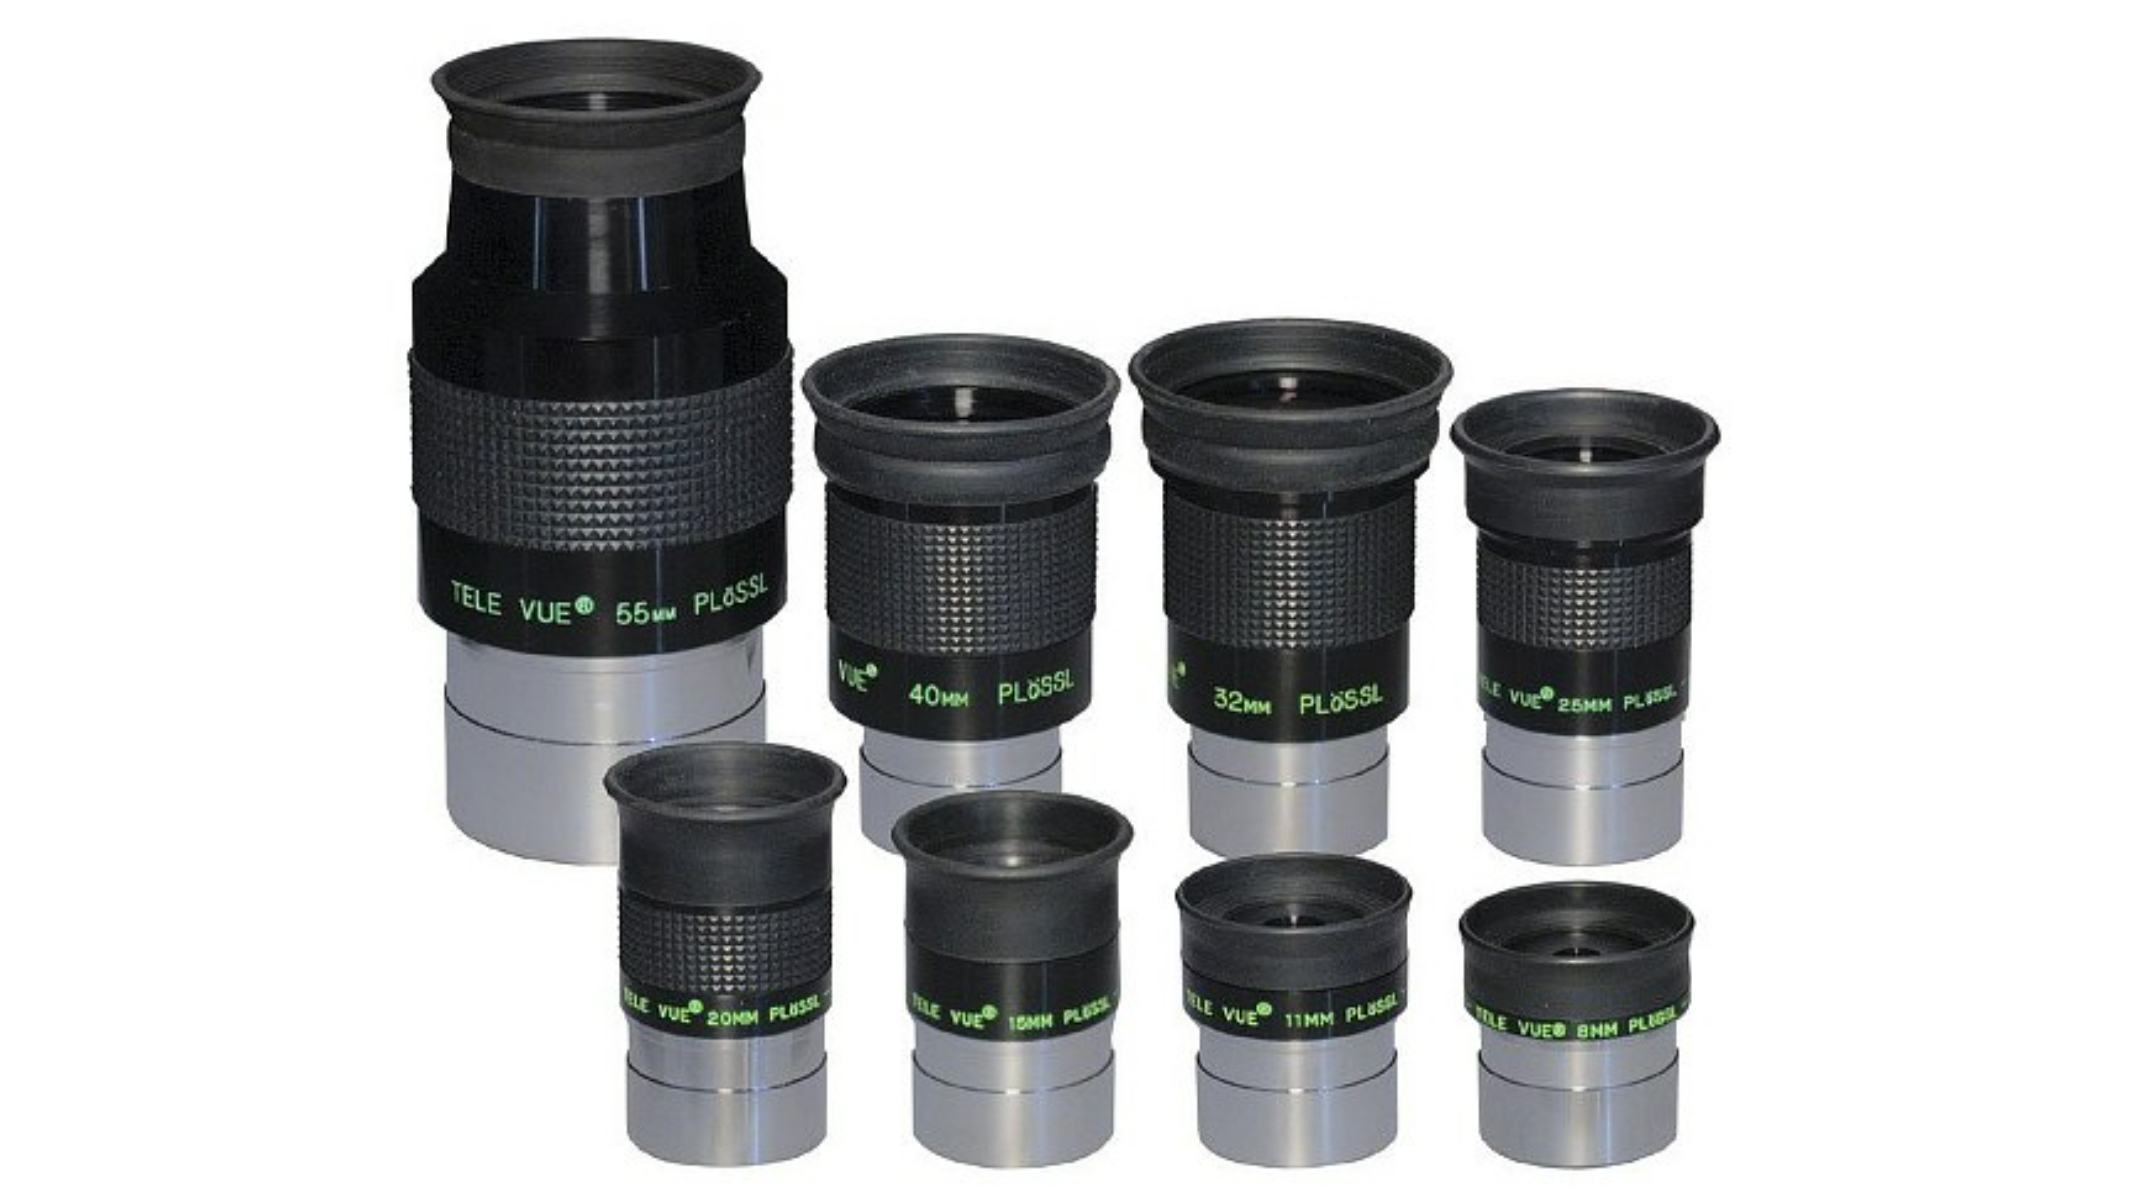 Product photos of the TeleVue Plossl Eyepieces